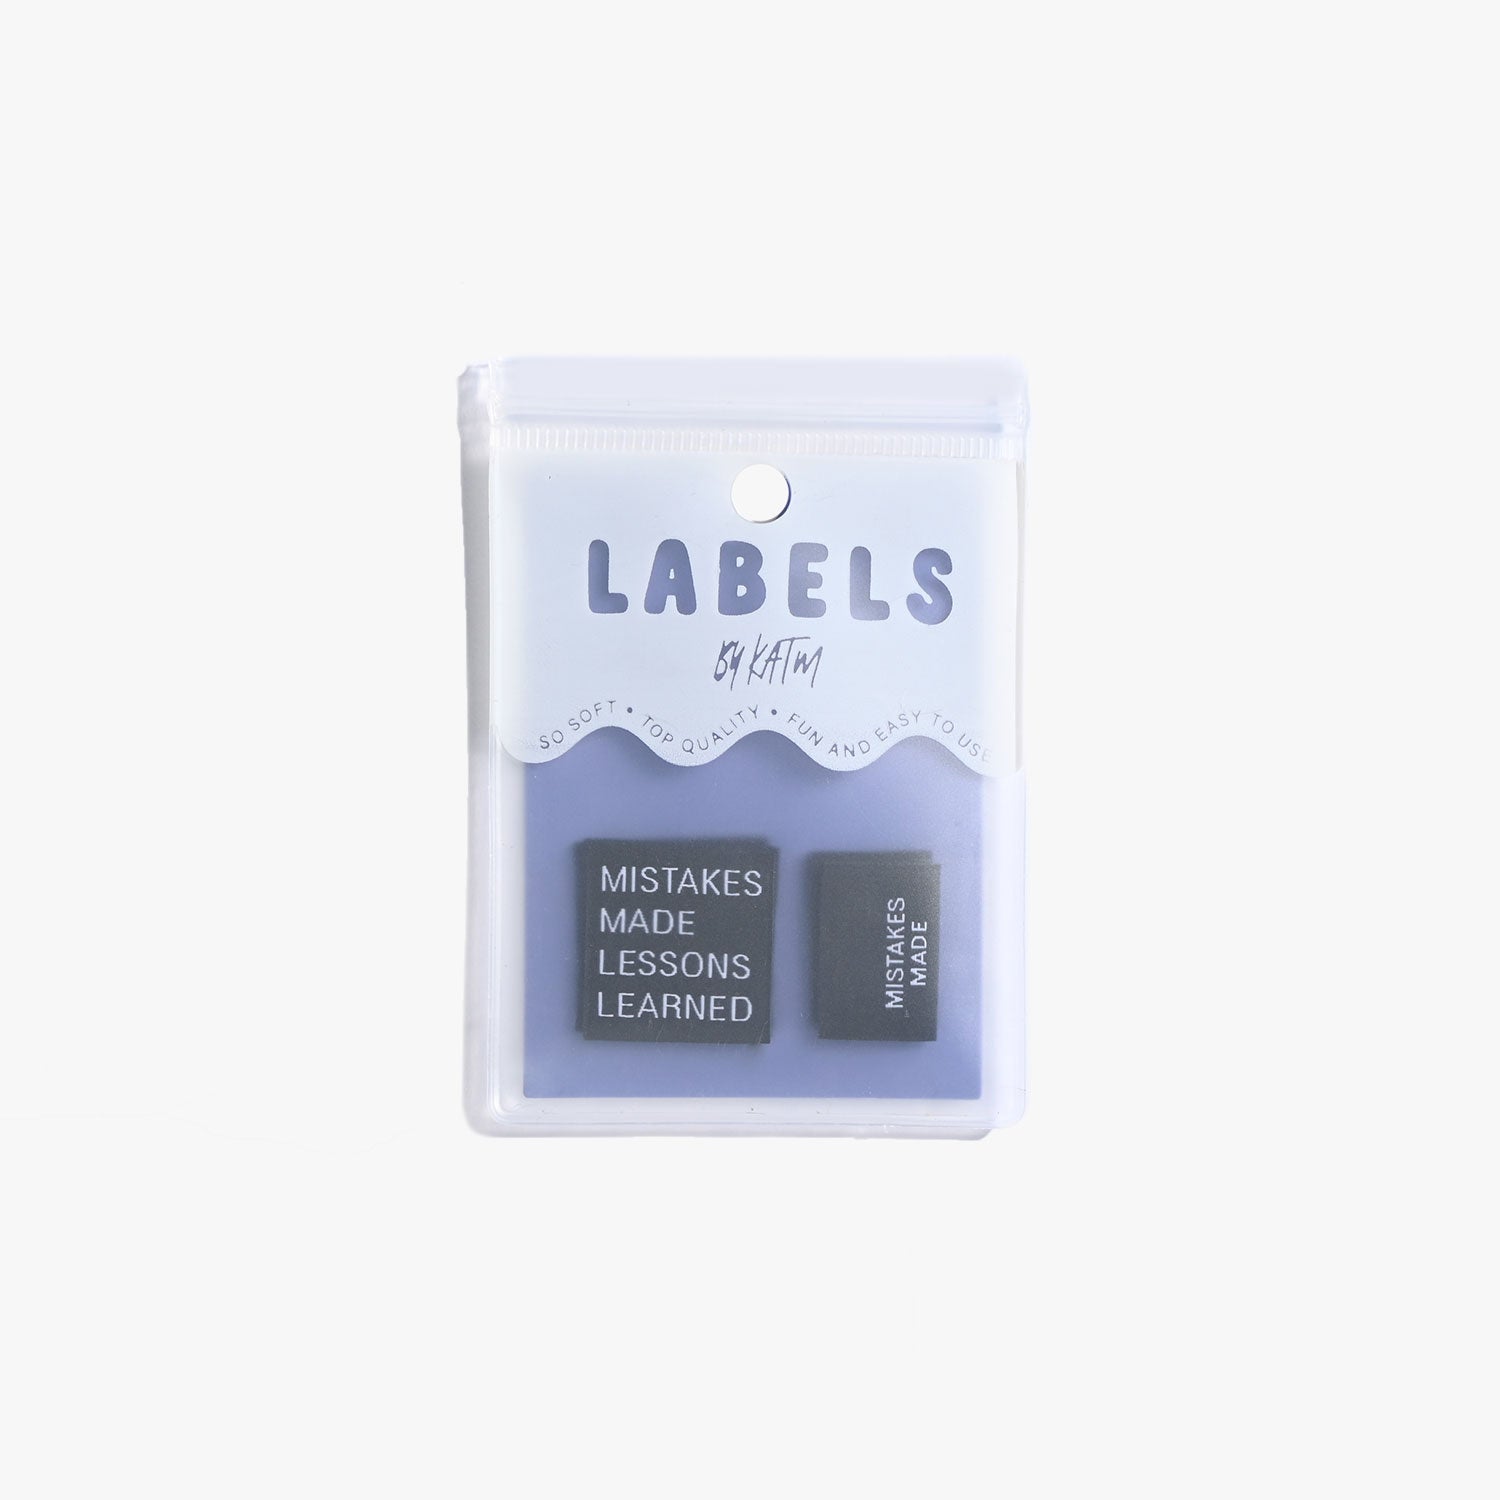 MISTAKES MADE LESSONS LEARNED Woven Labels